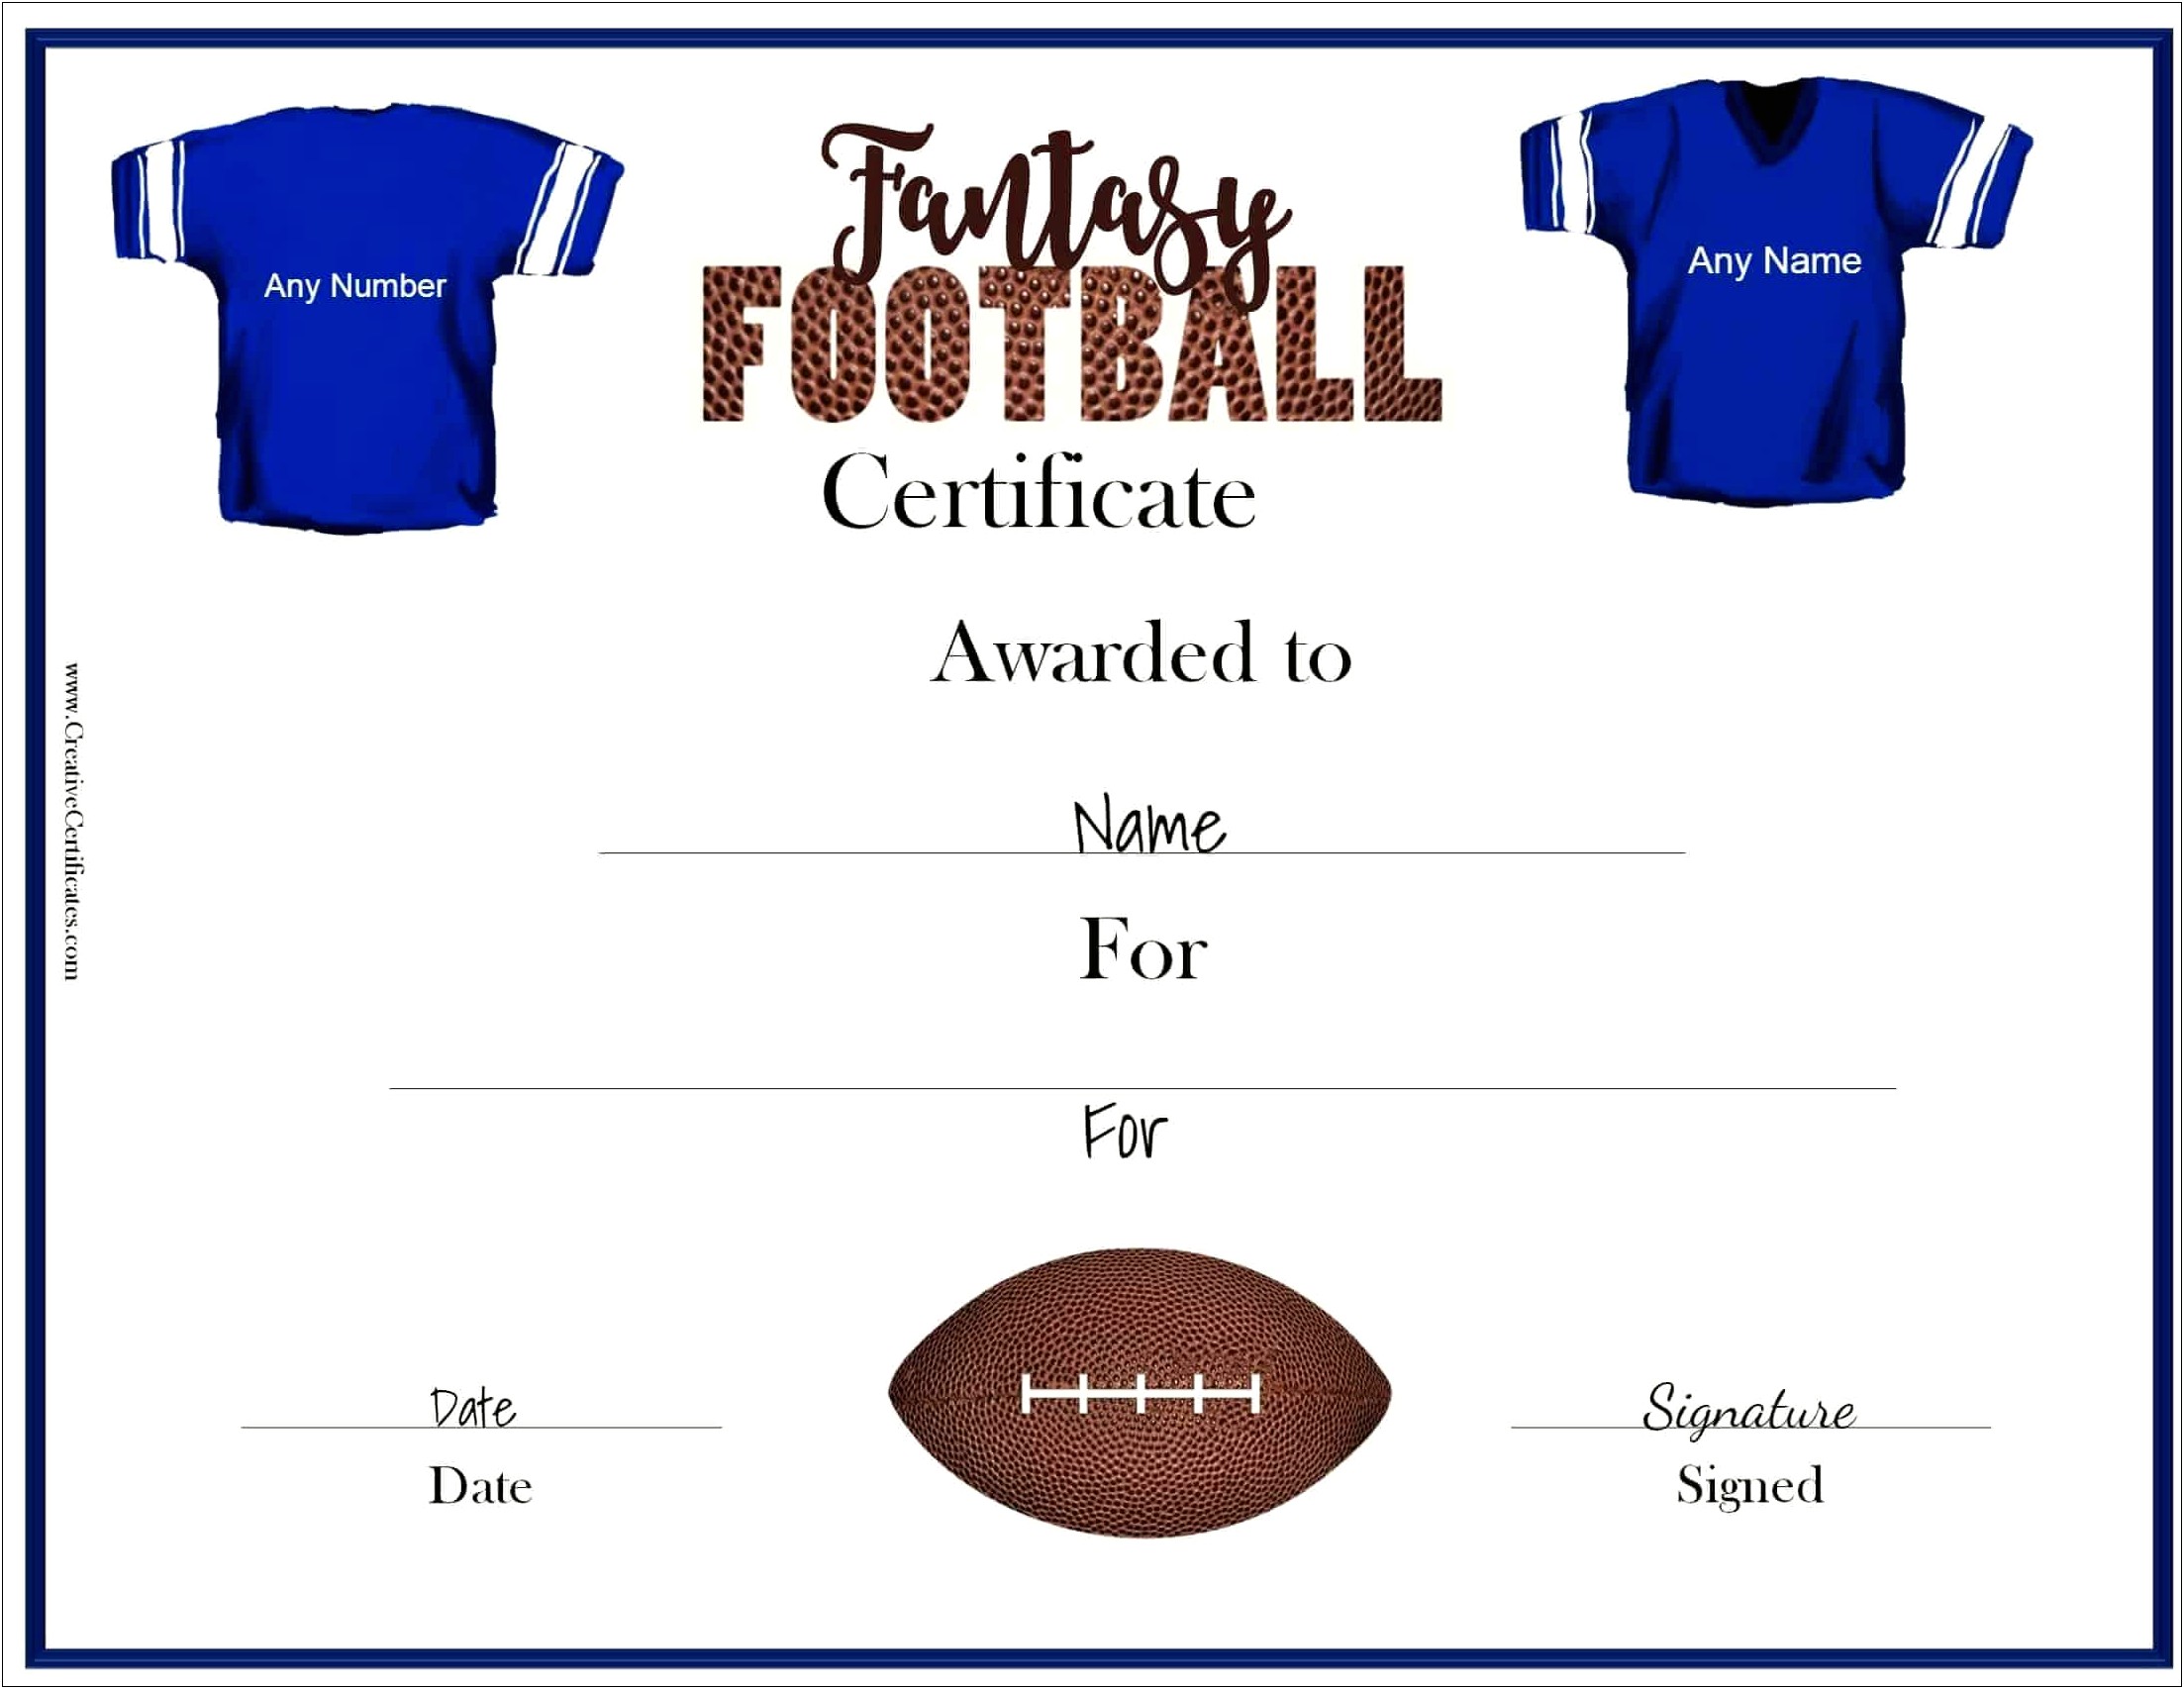 Free Fantasy Football Champion Certificate Template